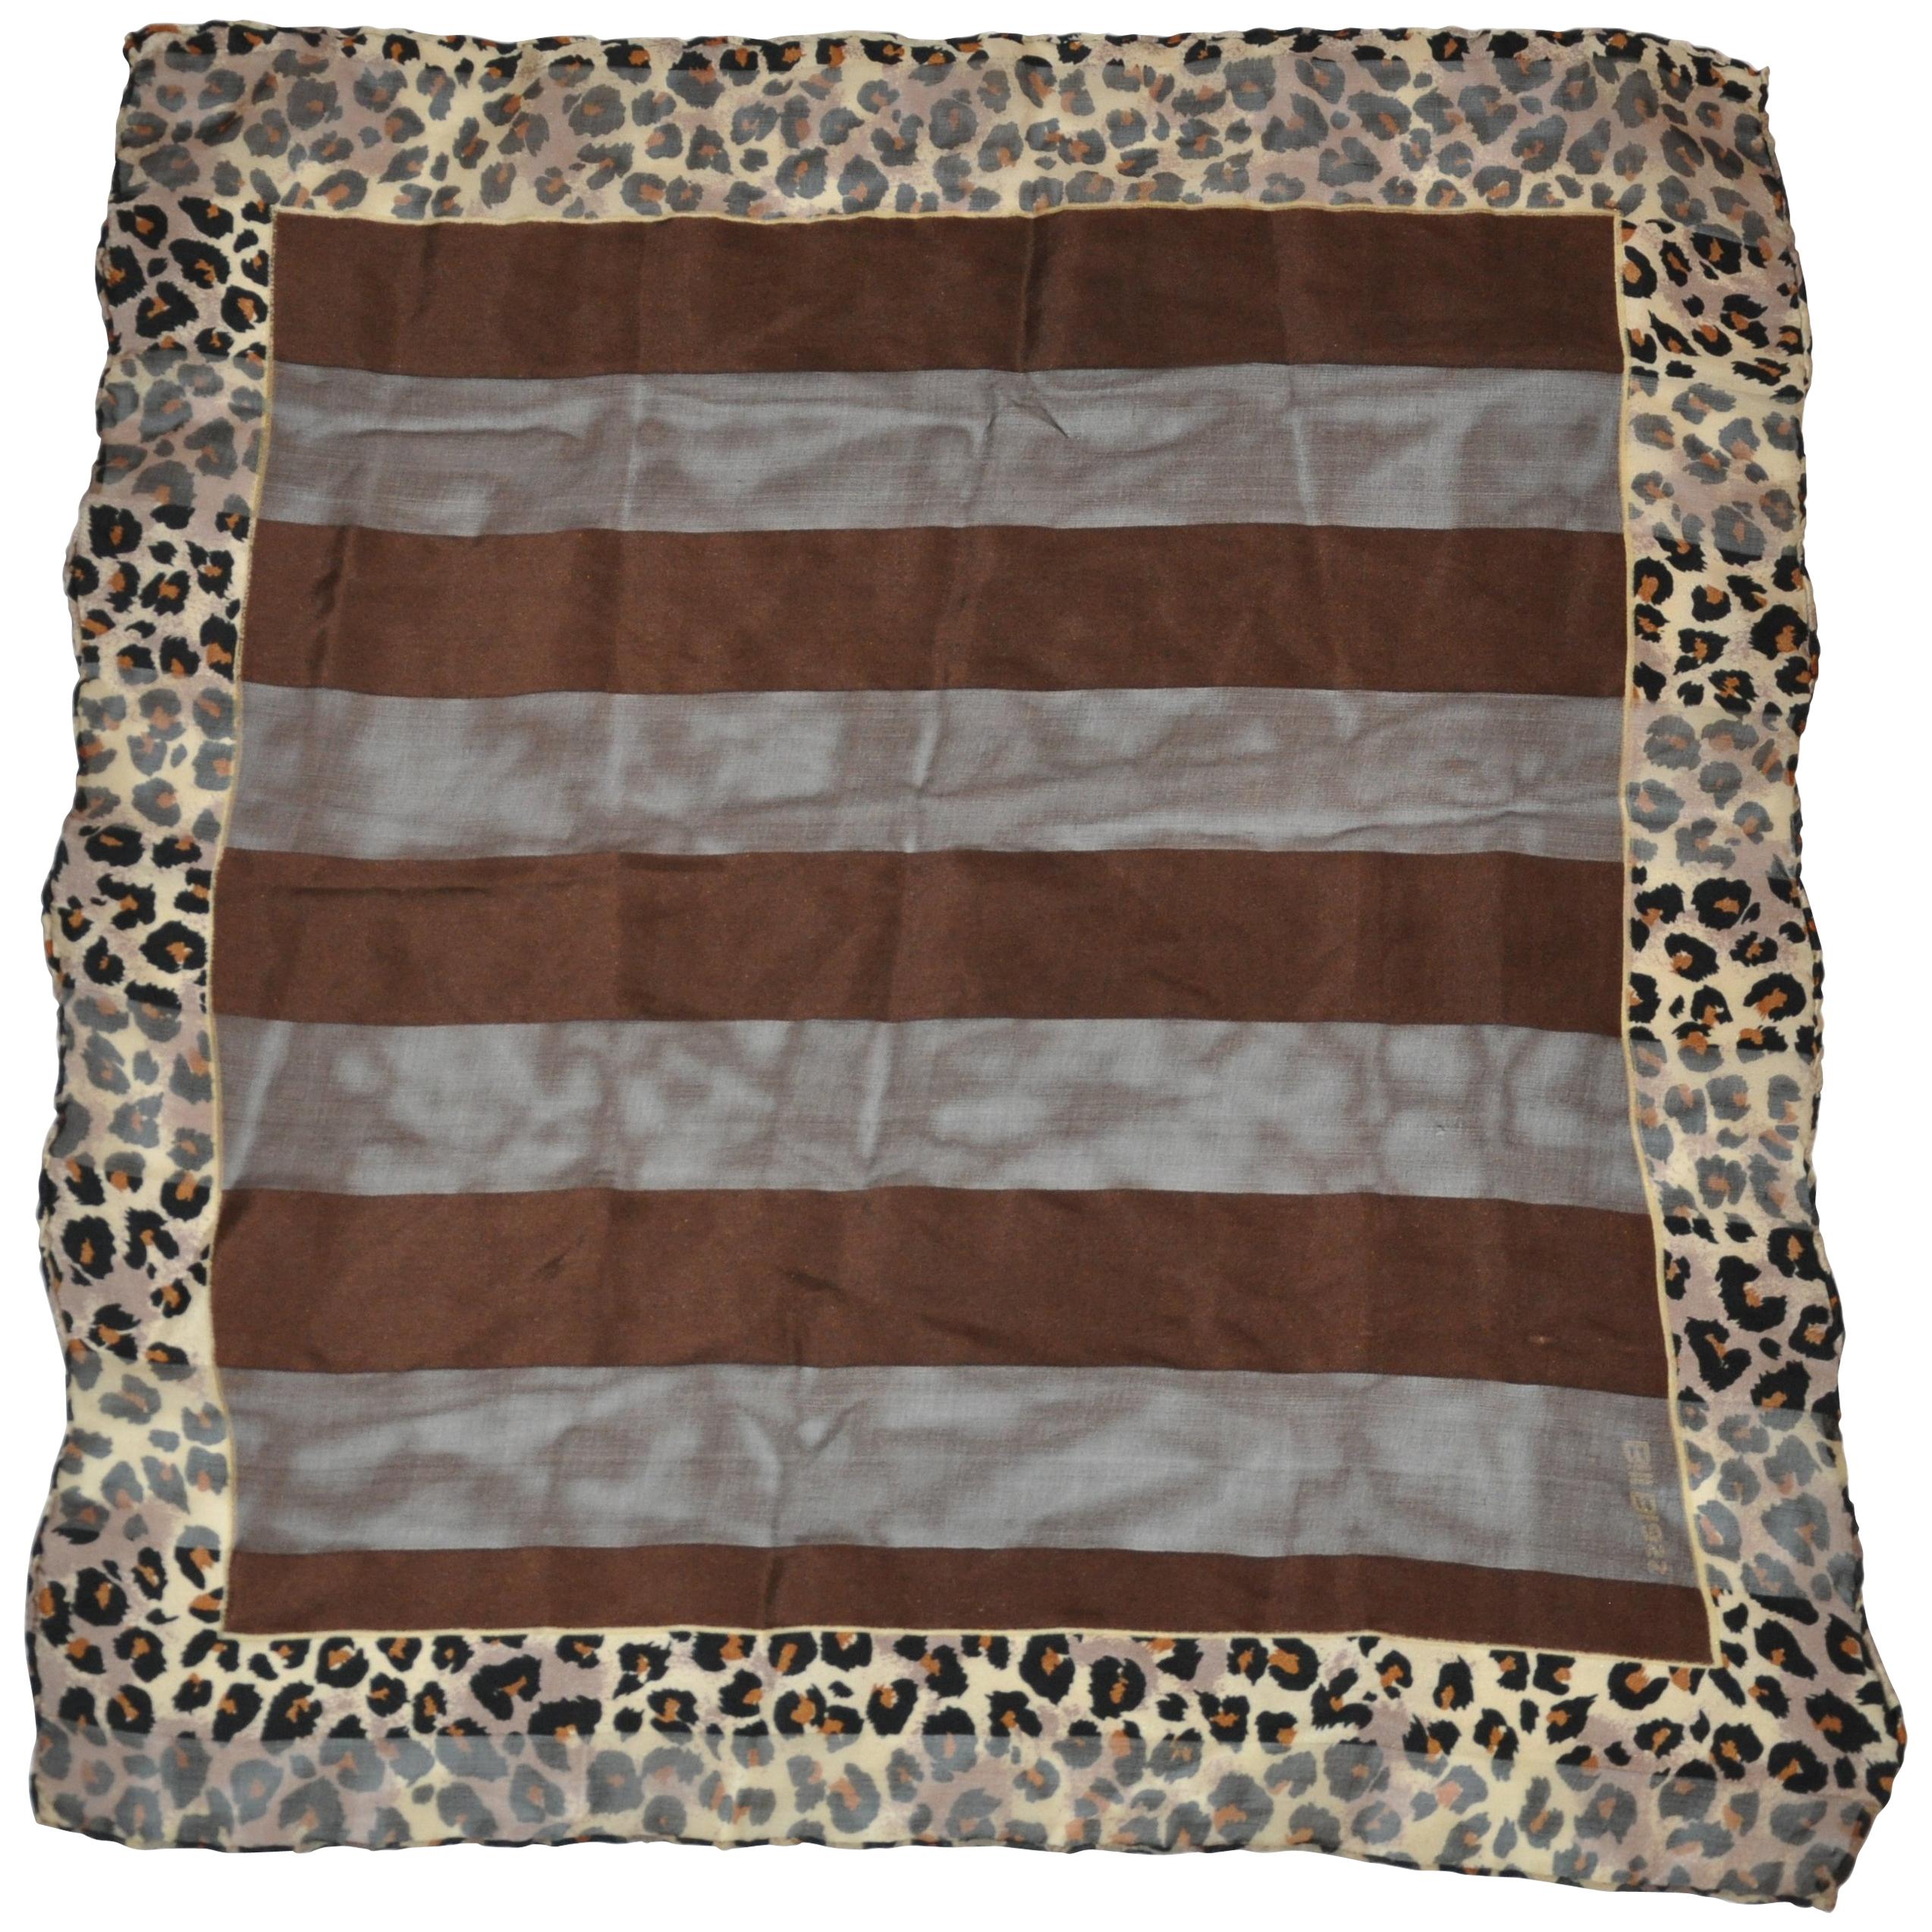 Bill Blass Coco Brown with Leopard Borders Silk and Silk Chiffon Scarf For Sale